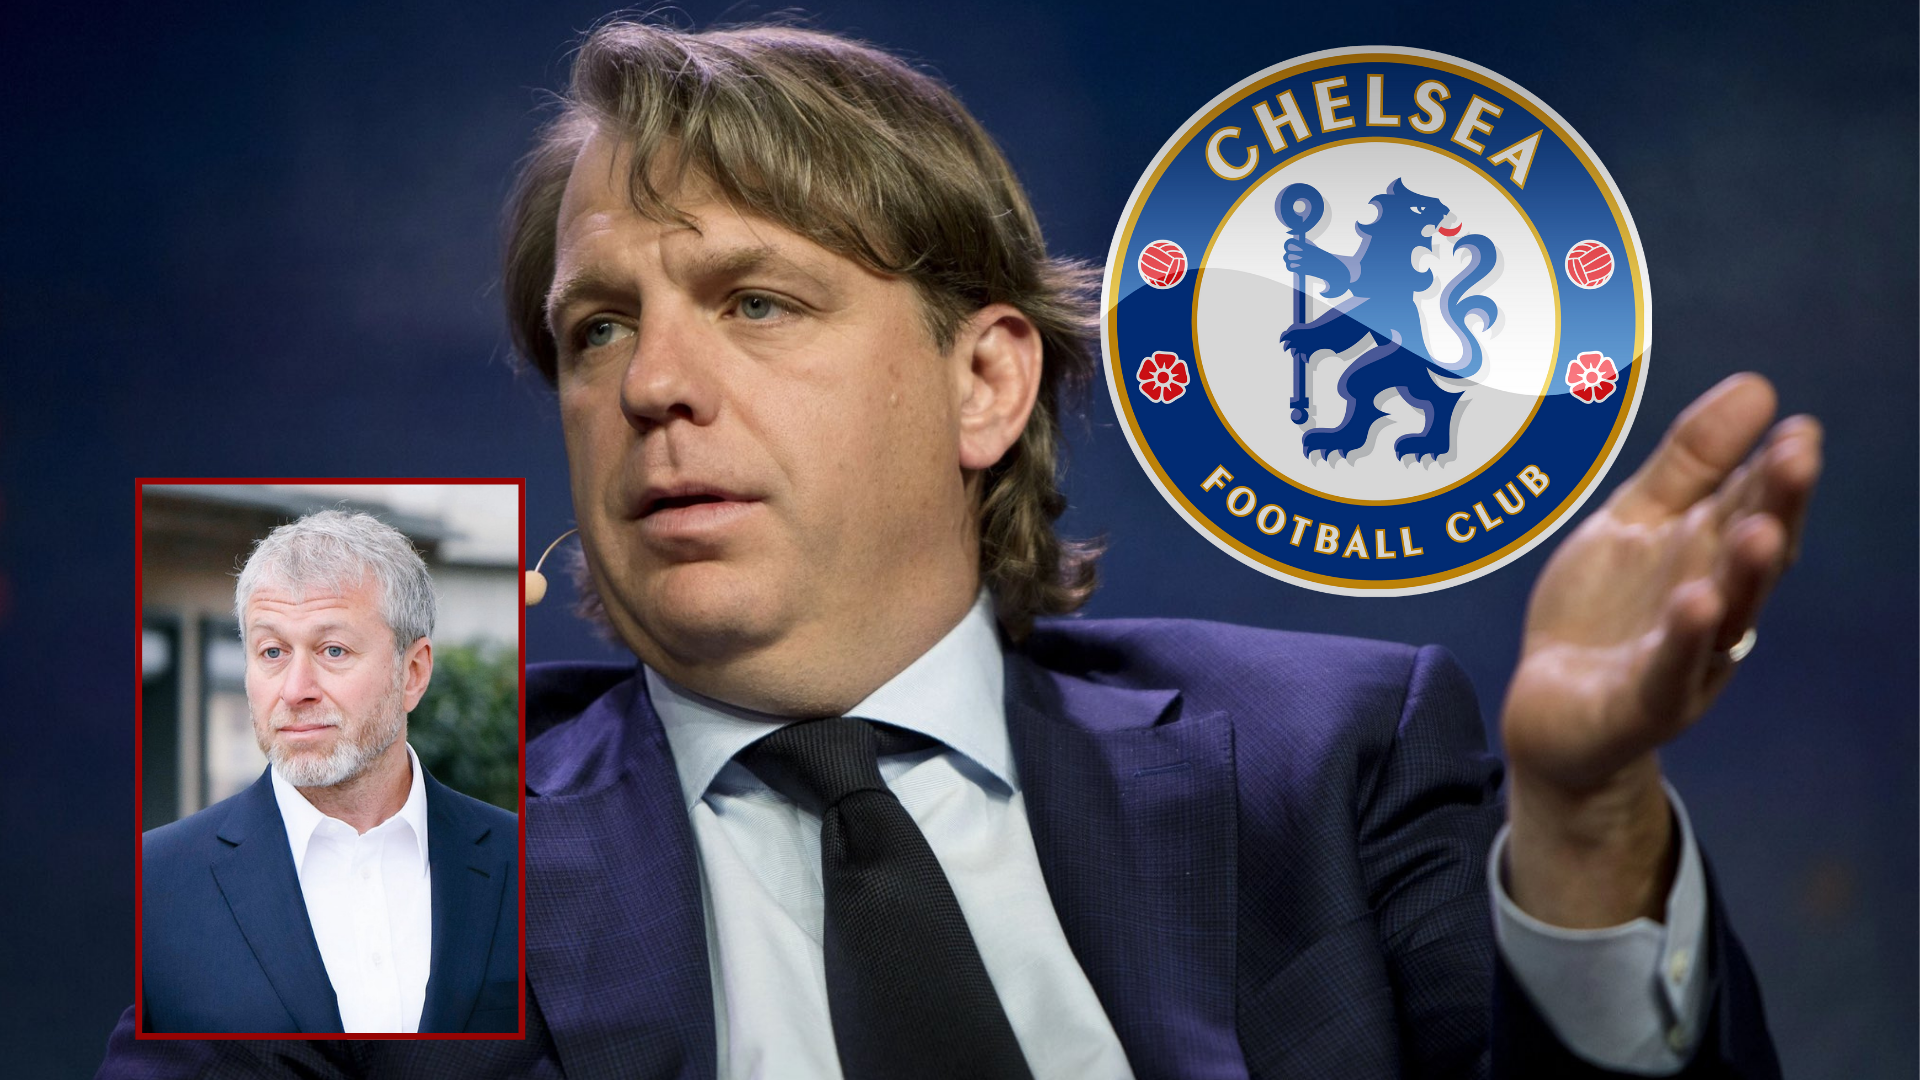 Todd Boehly wins Chelsea bid in a deal worth over 1.8 trillion naira